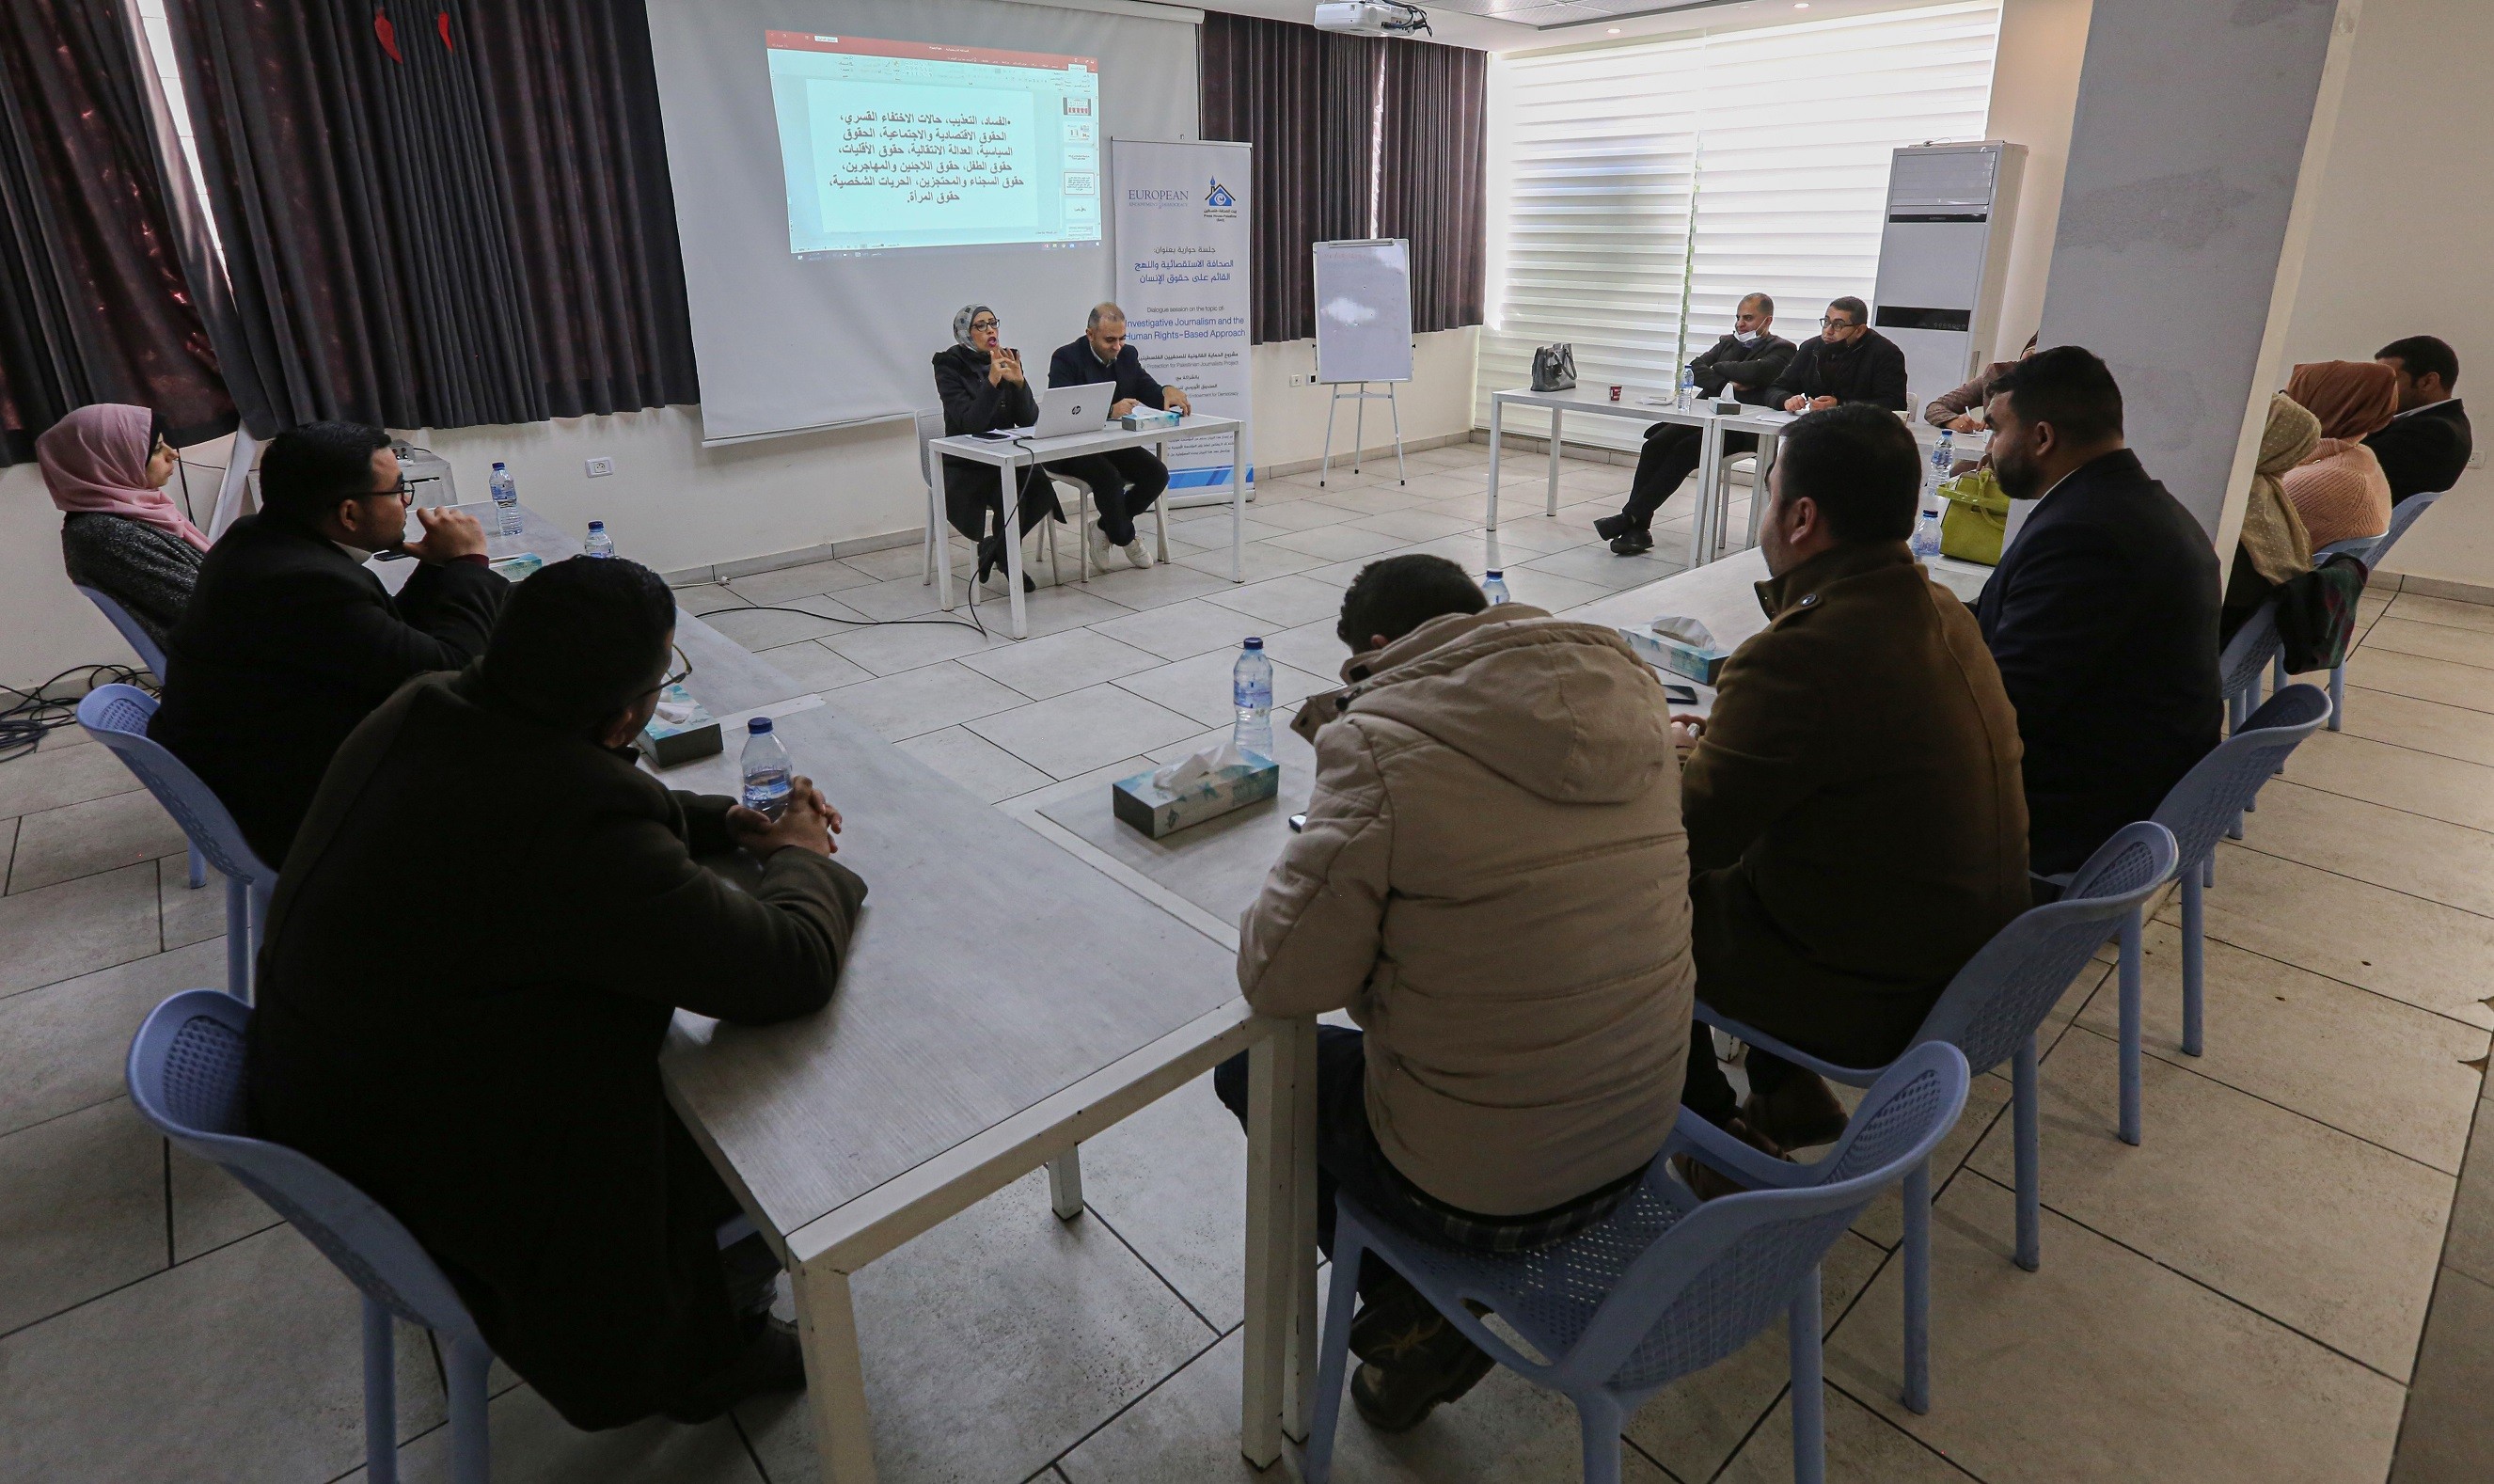 Press House holds a dialogue session on Investigative Journalism and Human Rights-Based Approach